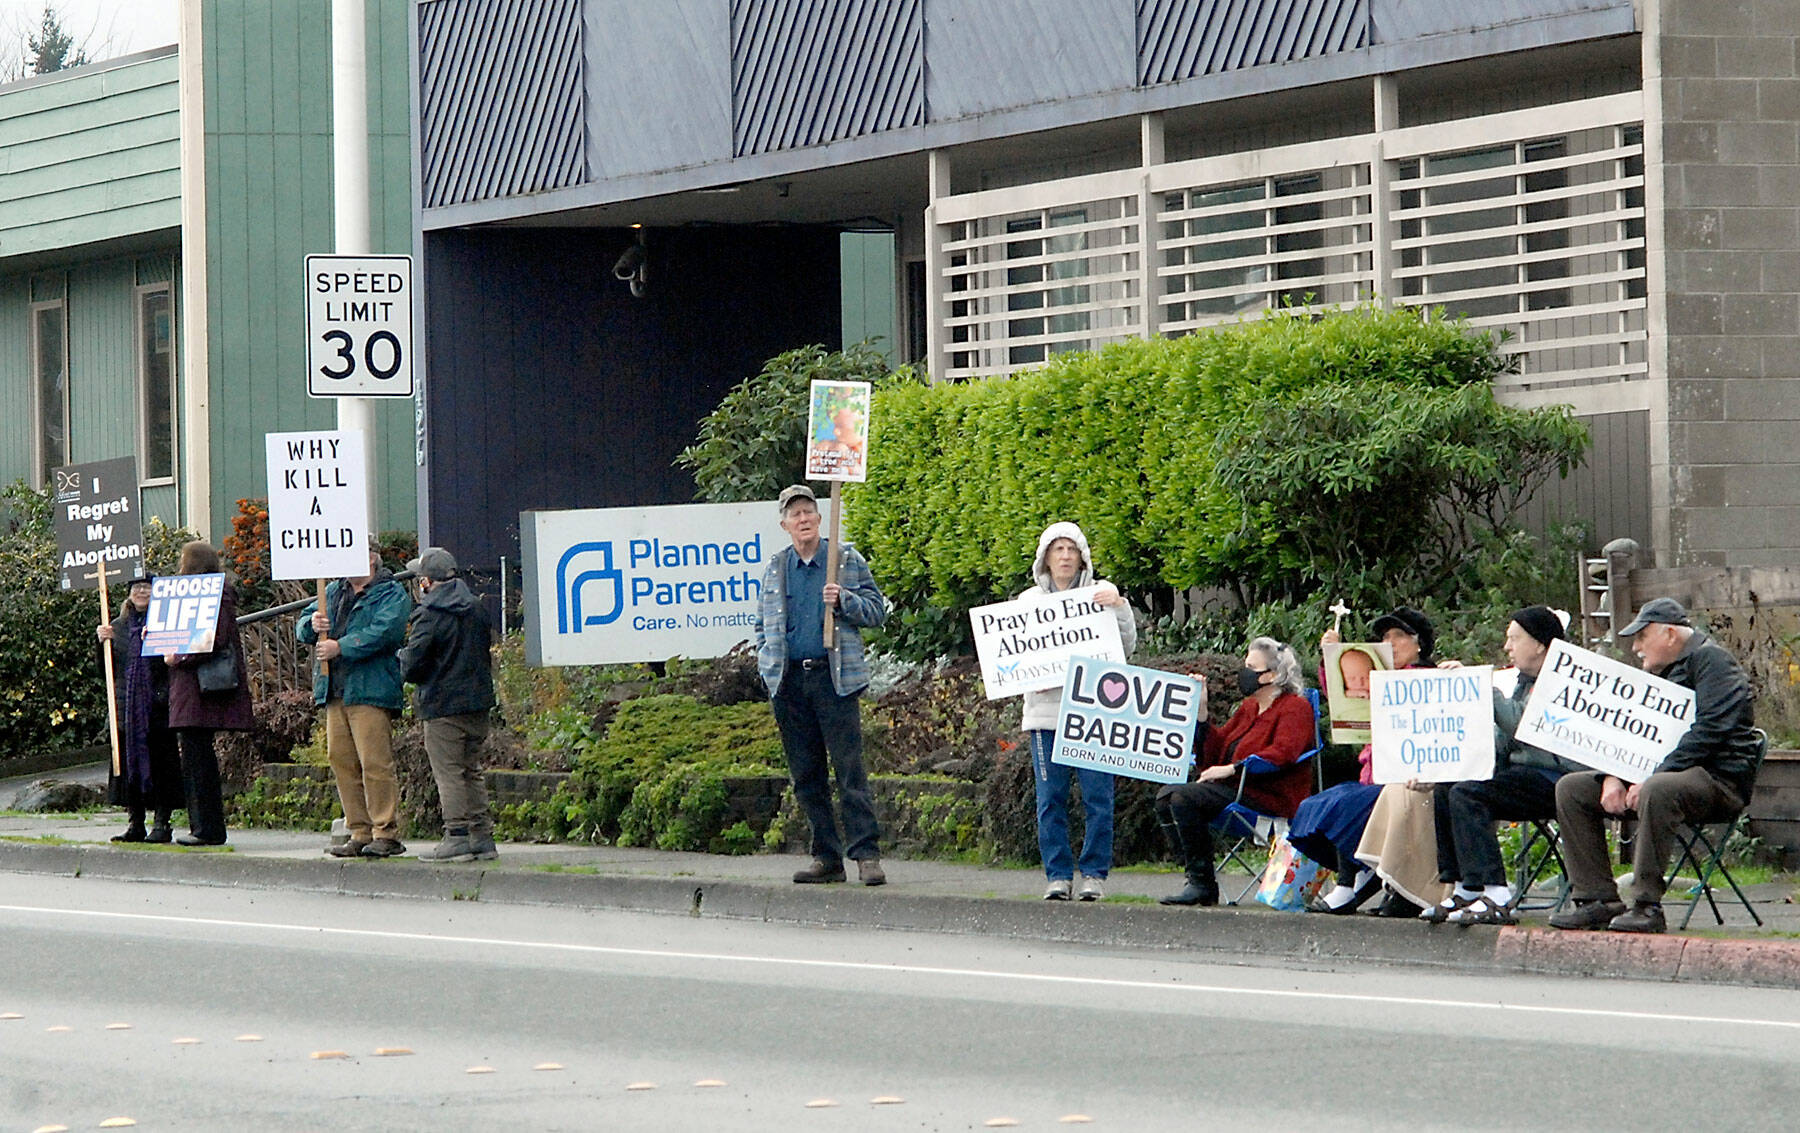 Pro-life protesters hold signs in front of the Planned Parenthood clinic on Eighth Street in Port Angeles. (Keith Thorpe/Peninsula Daily News)